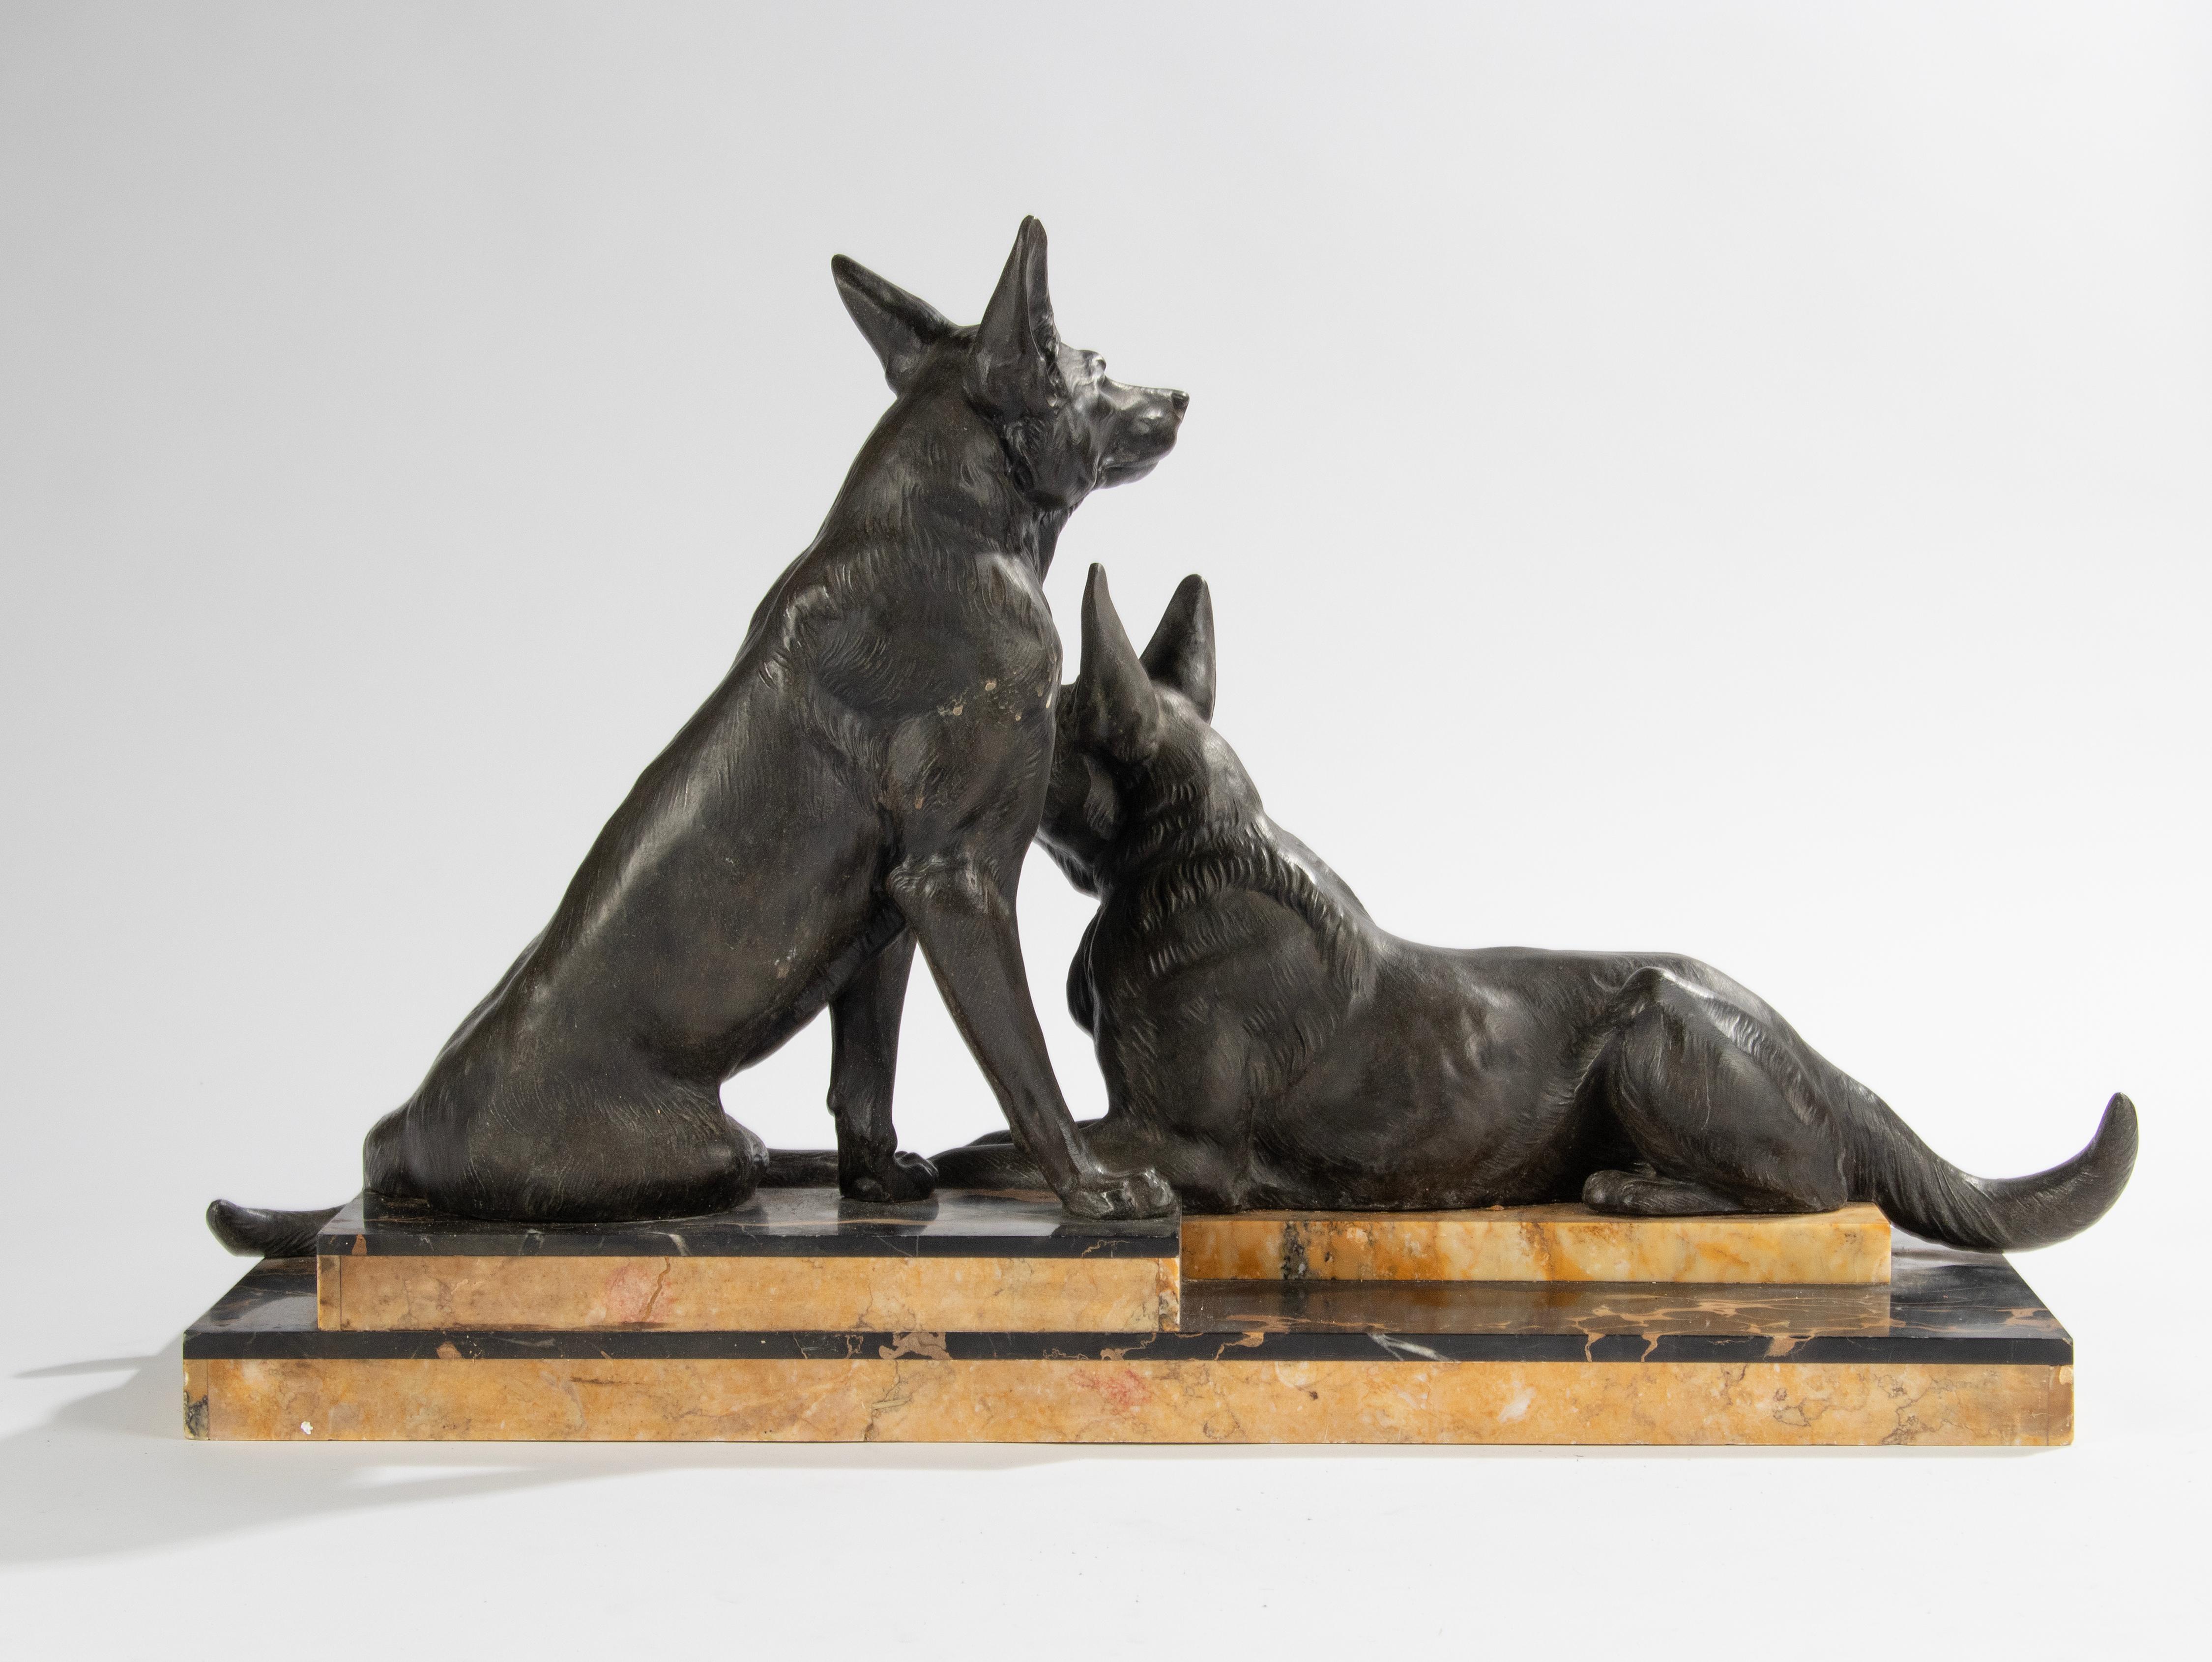 Art Deco Period Sculpture of German or Belgian Sheppards by Louis Carvin For Sale 9